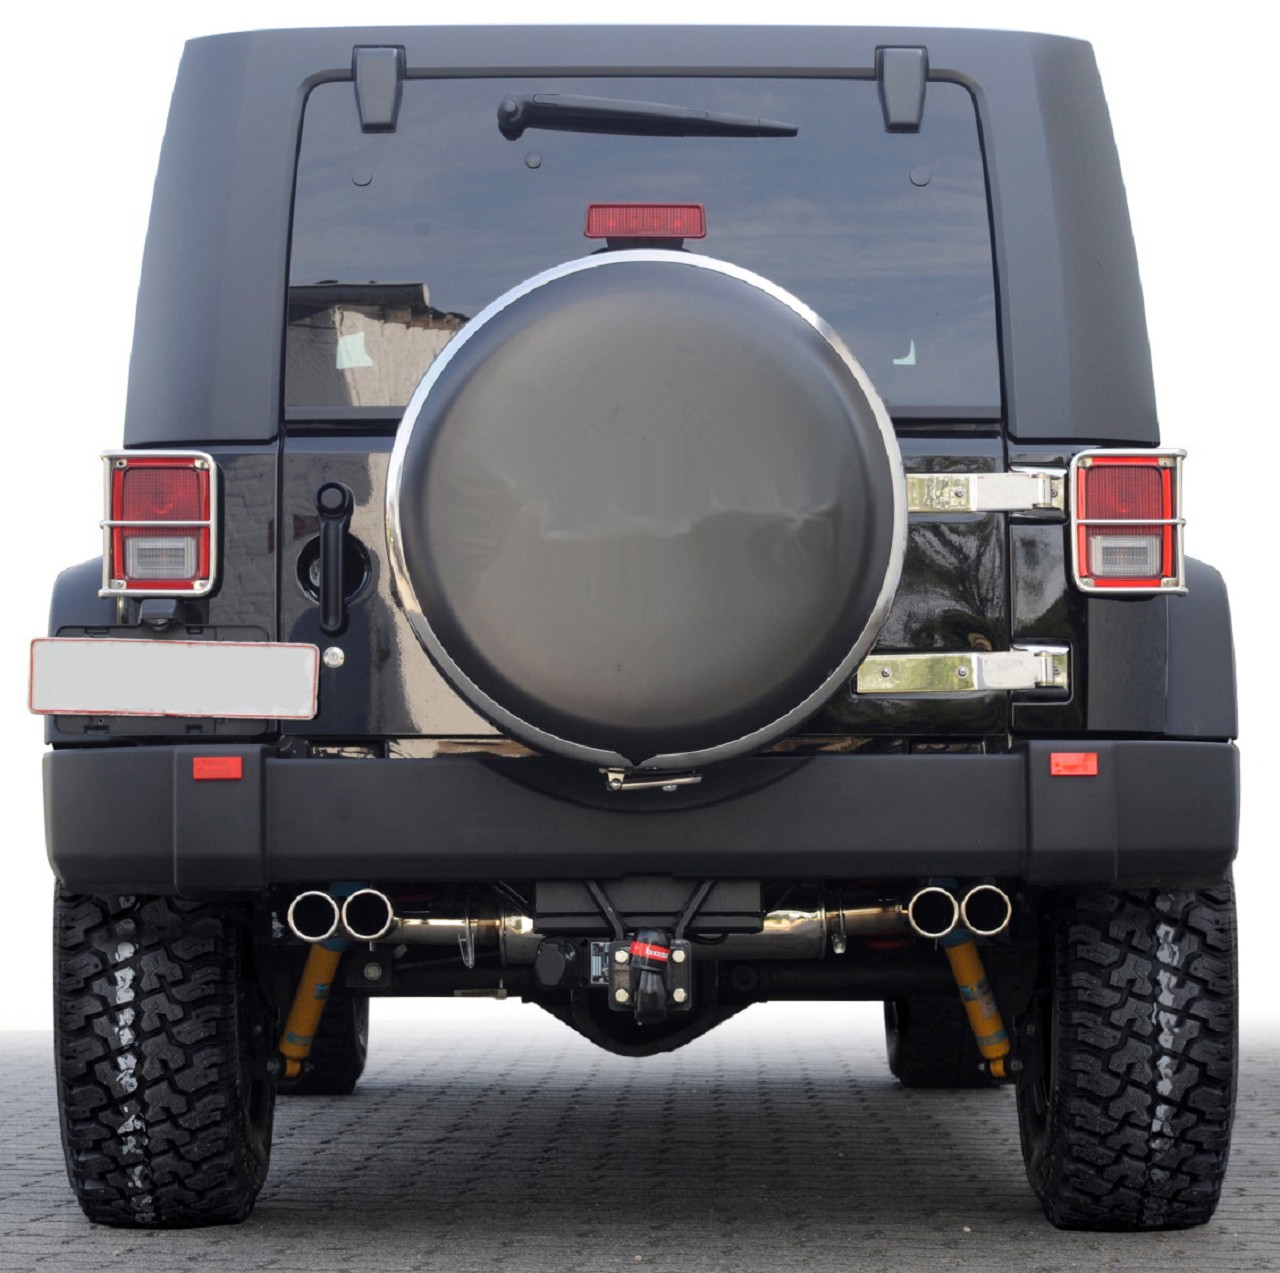 Tyre cover suitable for Jeep Wrangler JK (2007-2018) standard tyres 255/75R17 and 255/70R18